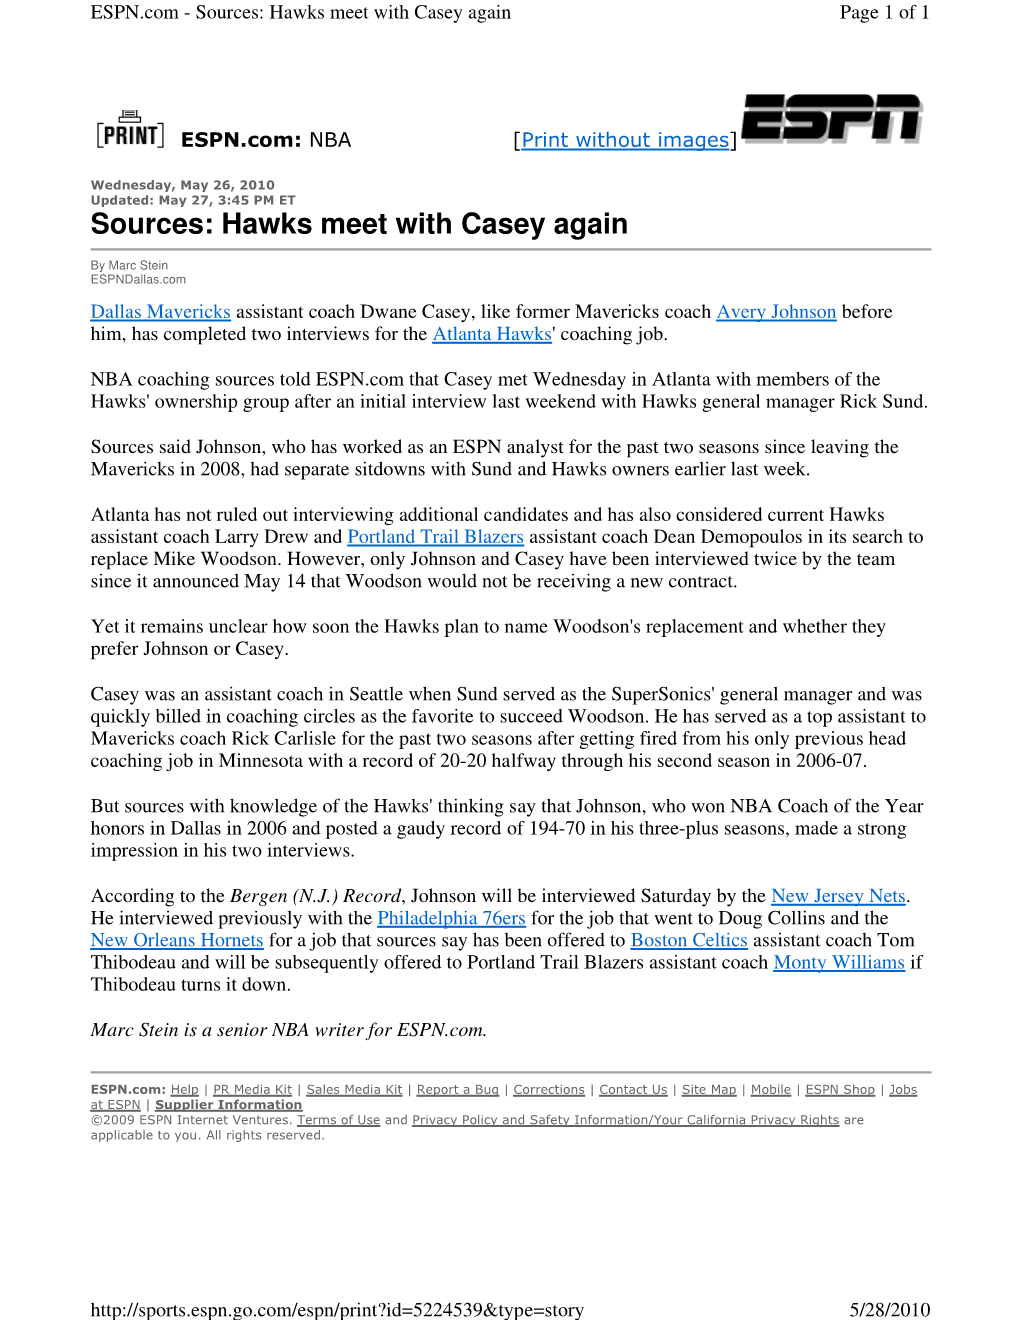 Hawks Meet with Casey Again Page 1 of 1